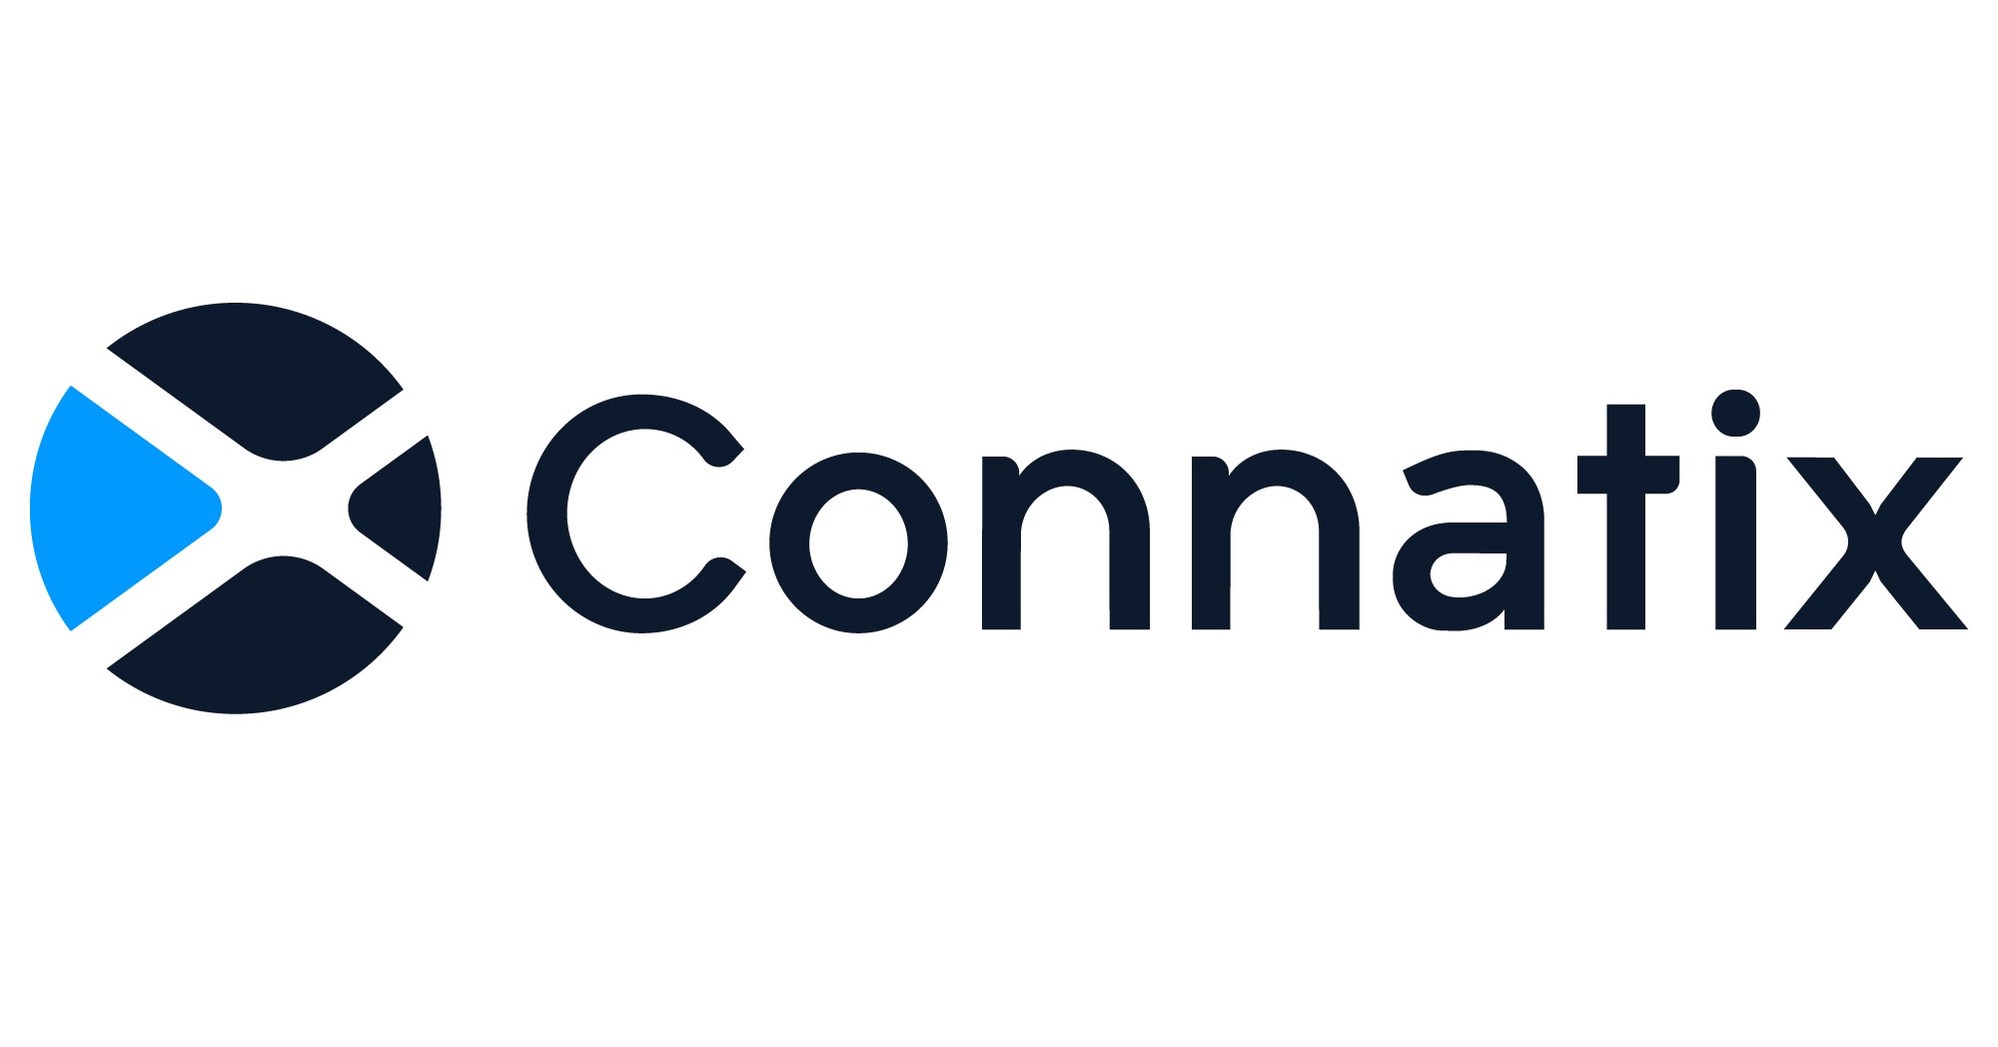 Connatix is a next-generation video technology platform for publishers. We believe in the power of engaging content and are on a mission to help publishers deliver successful videos without compromise.